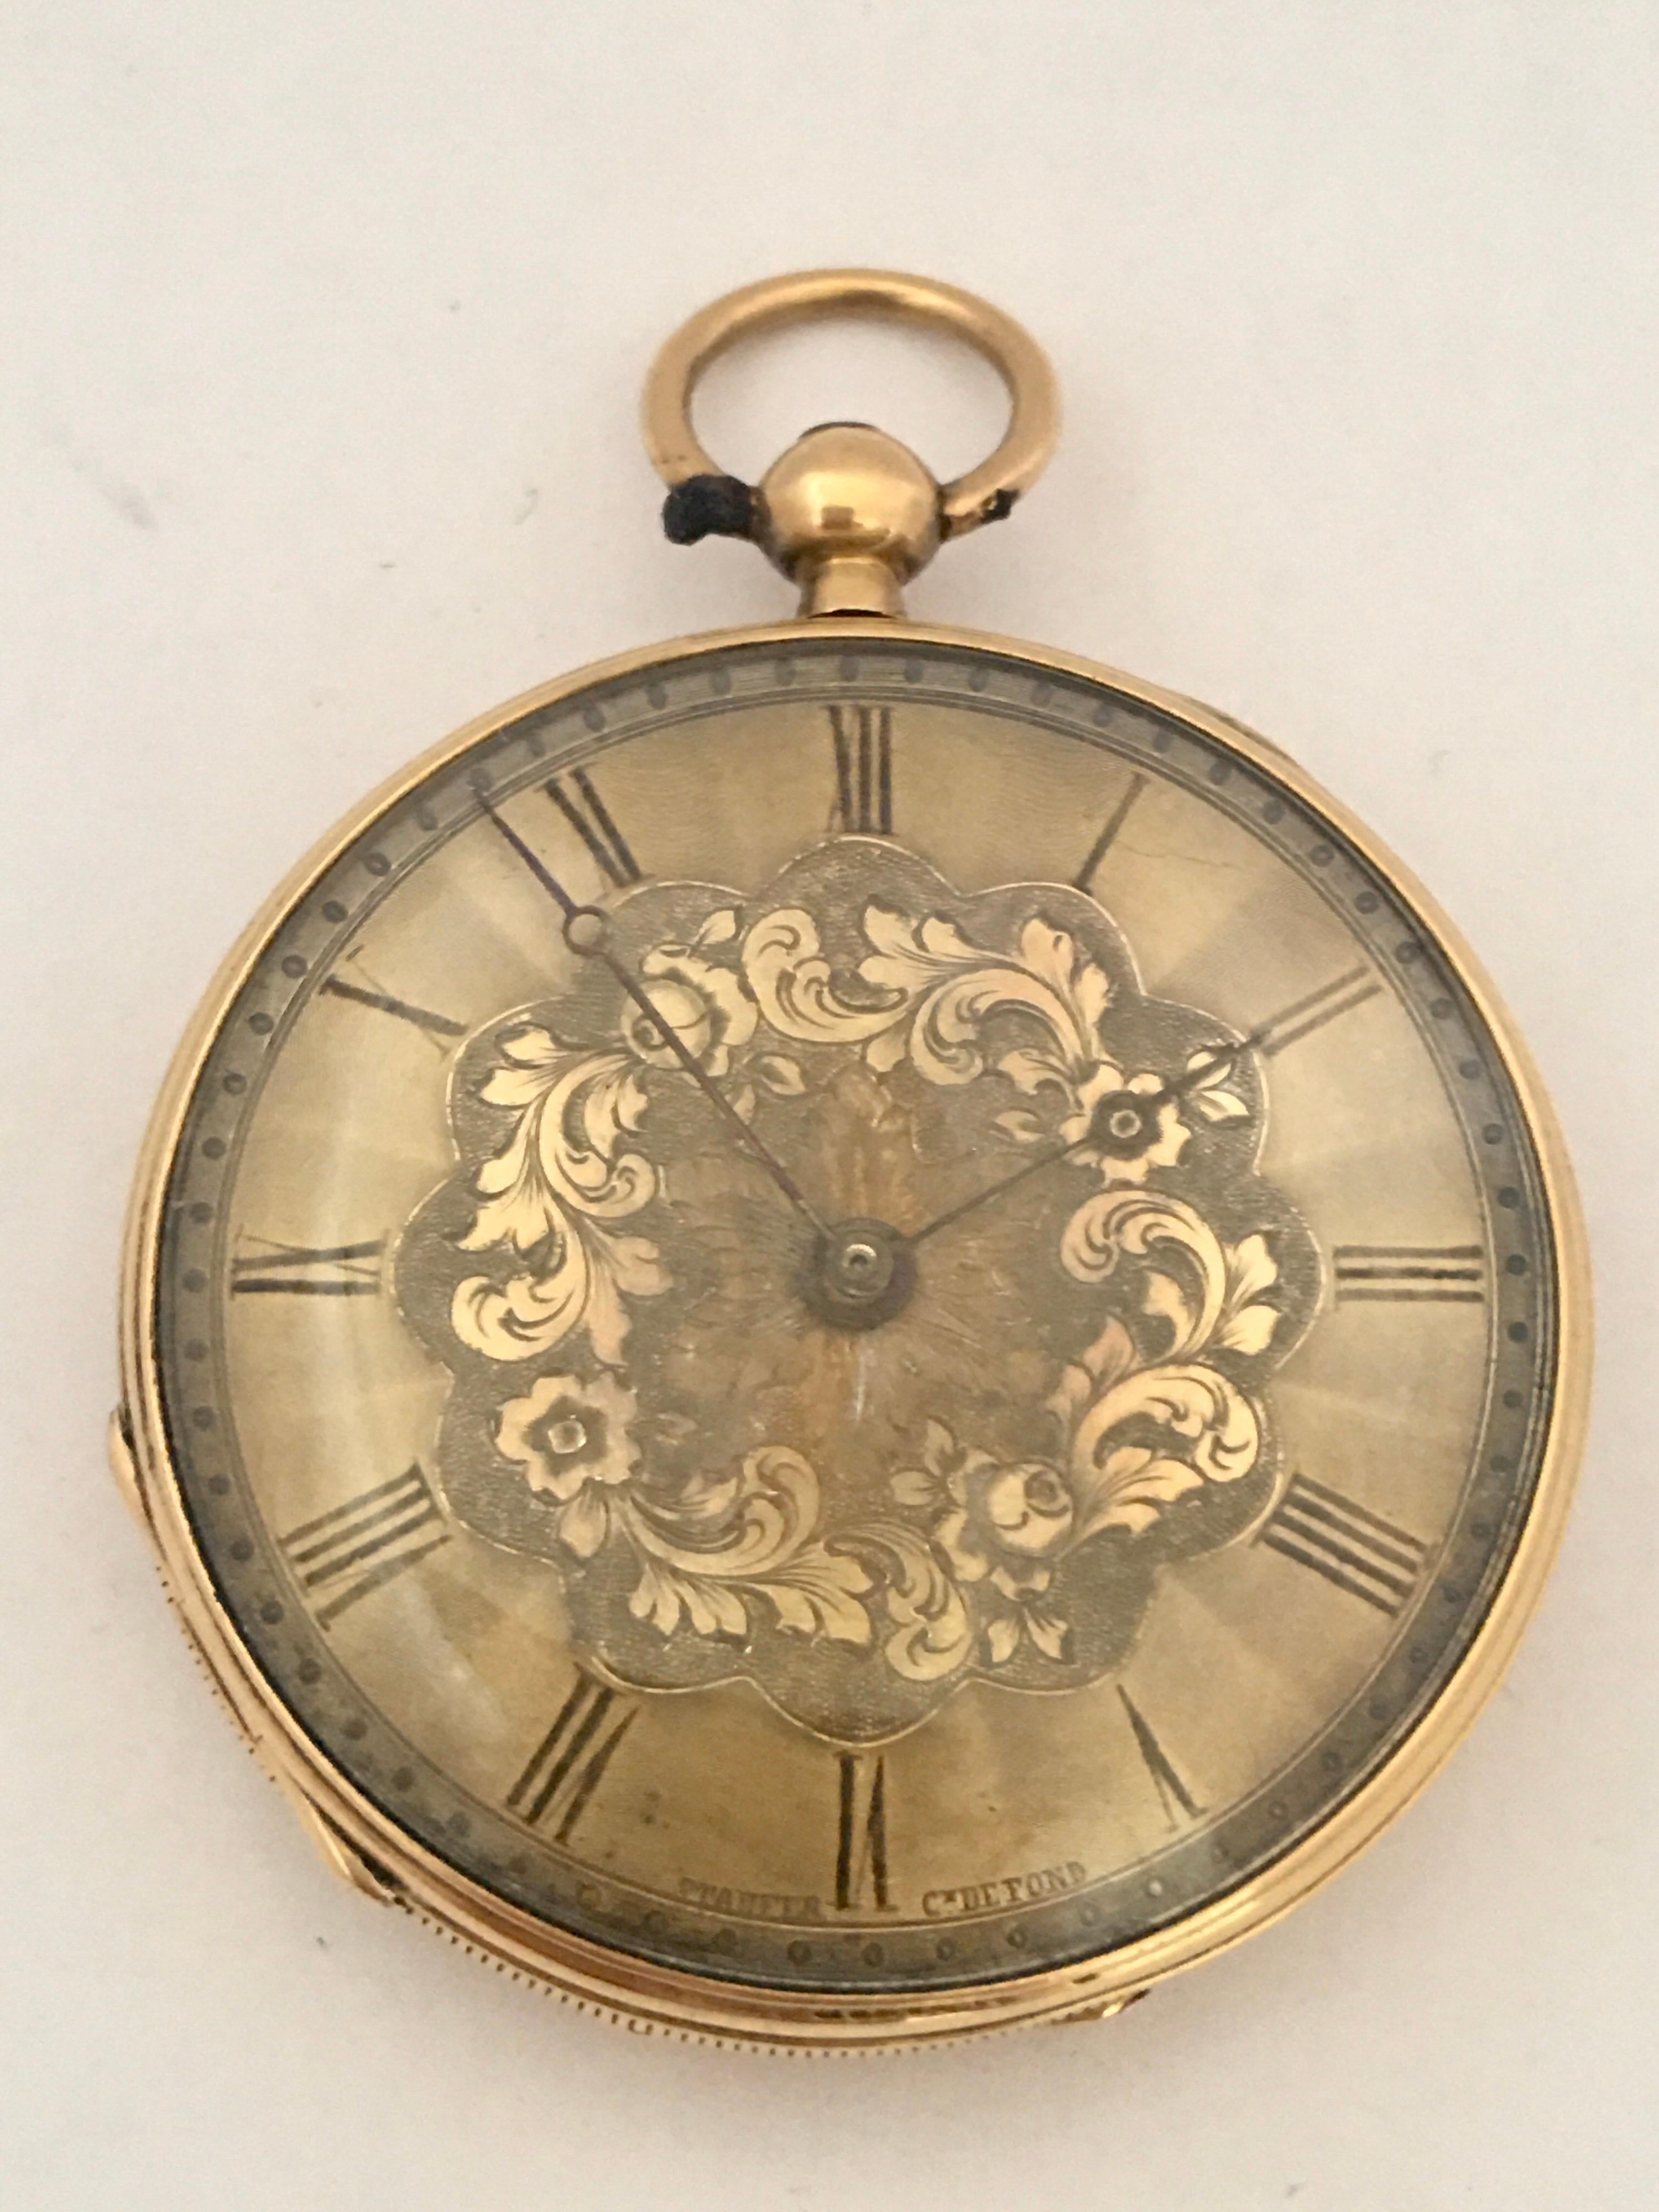 This beautiful antique gold pocket watch is working and it is ticking well. Visible signs of used and ageing with some light dents and scratches on the watch case and the dial is a bit tired and worn. It comes with a winding key. Watch size (